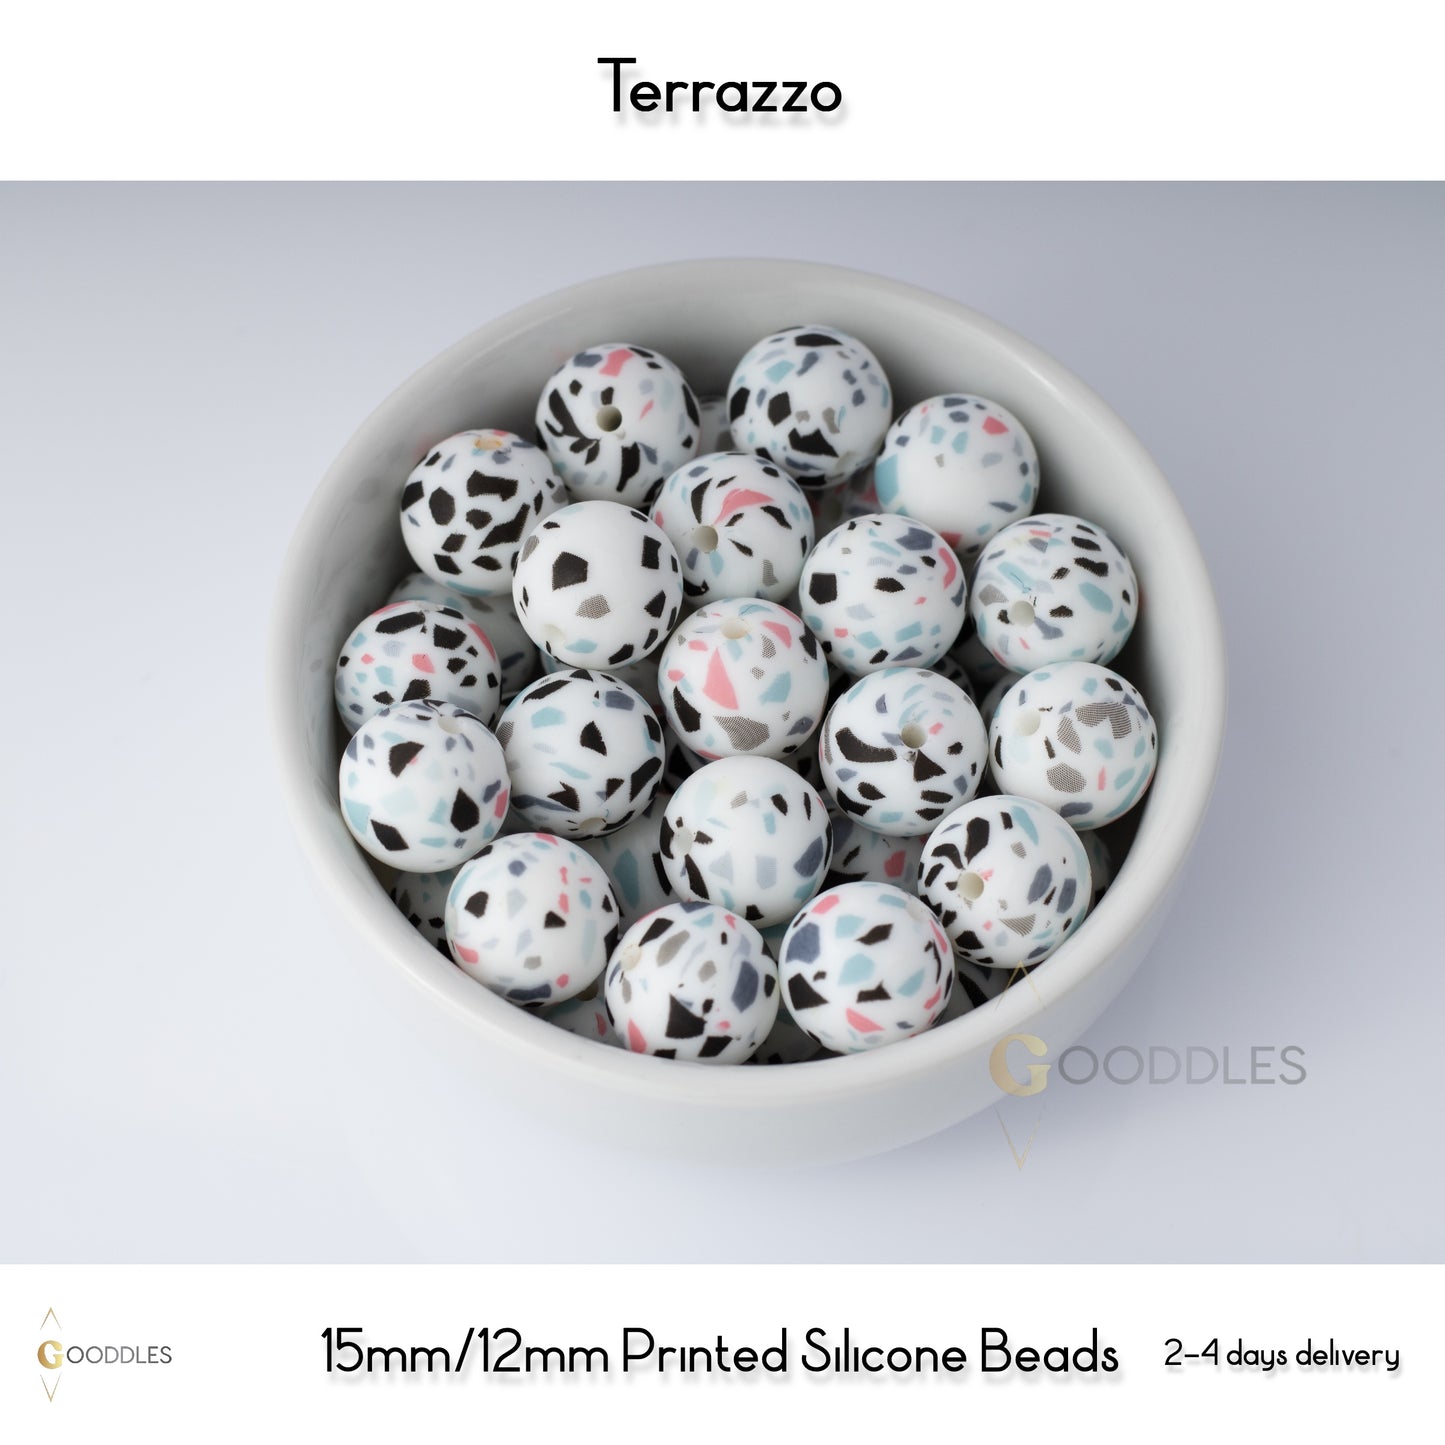 Terrazzo Silicone Beads Printed Round Silicone Beads